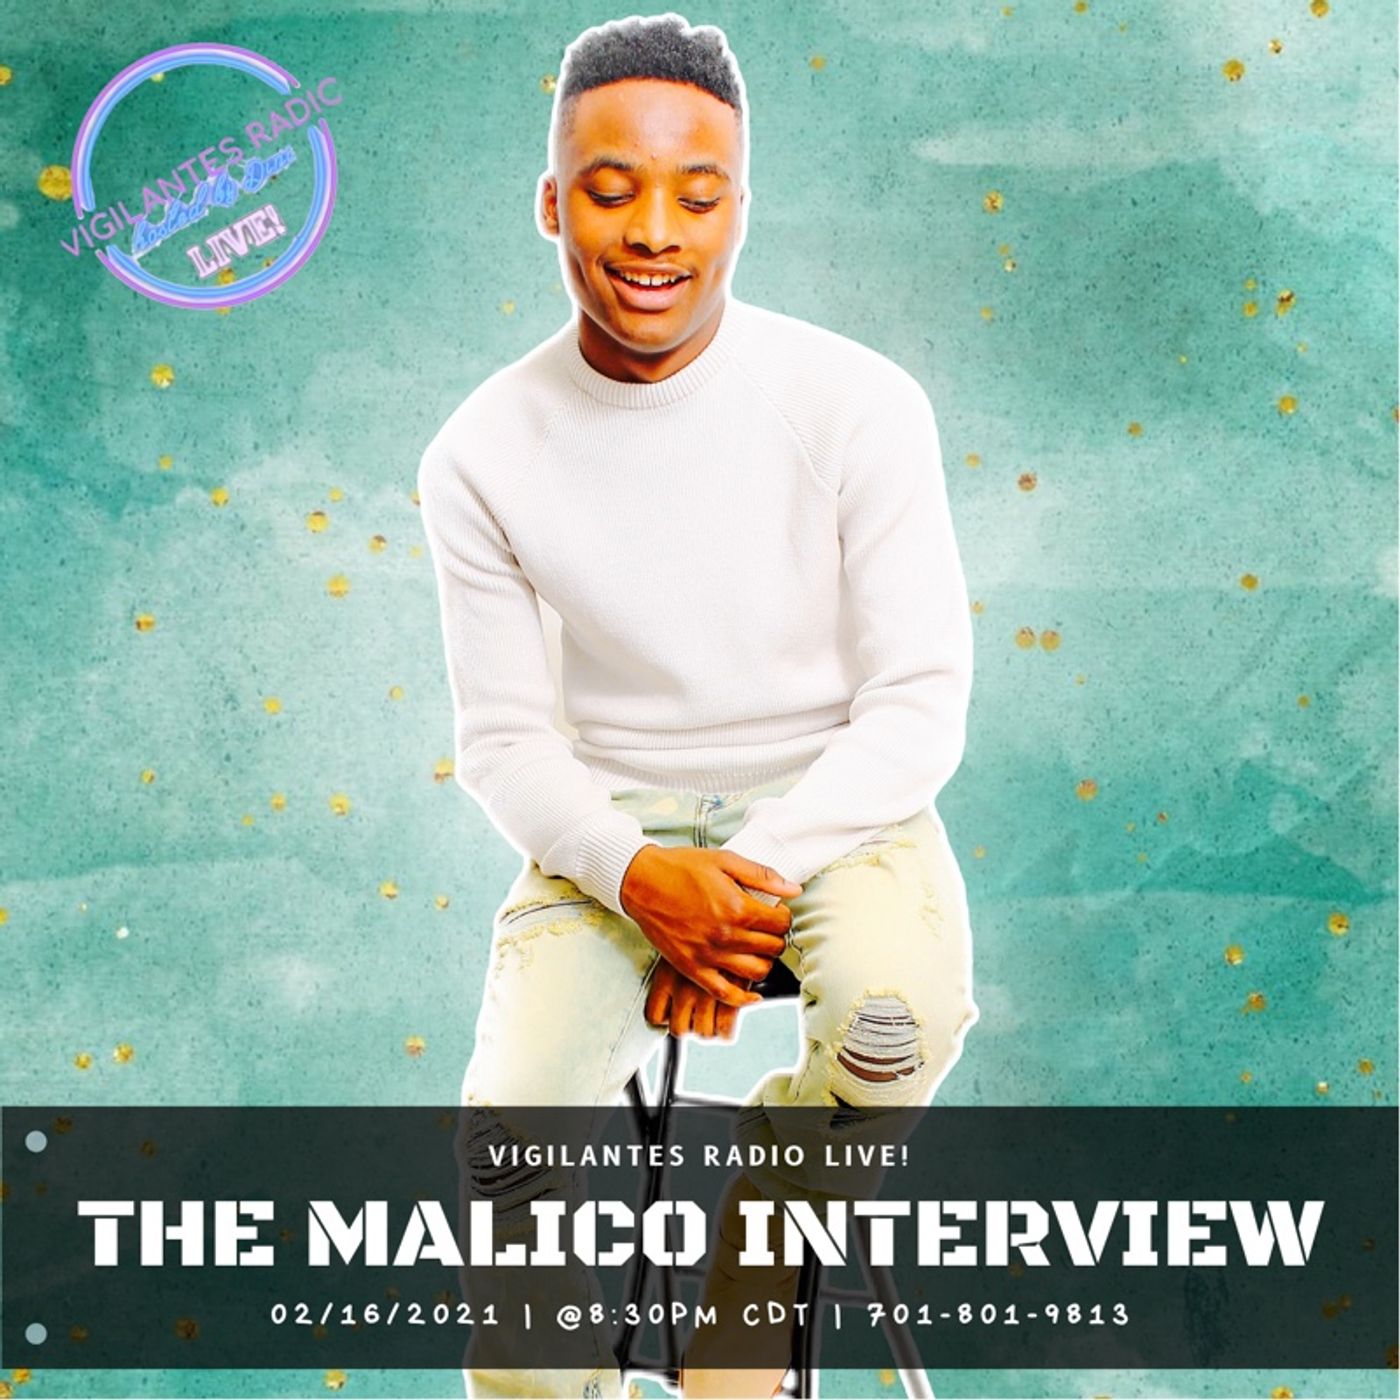 The Malico Interview. Image